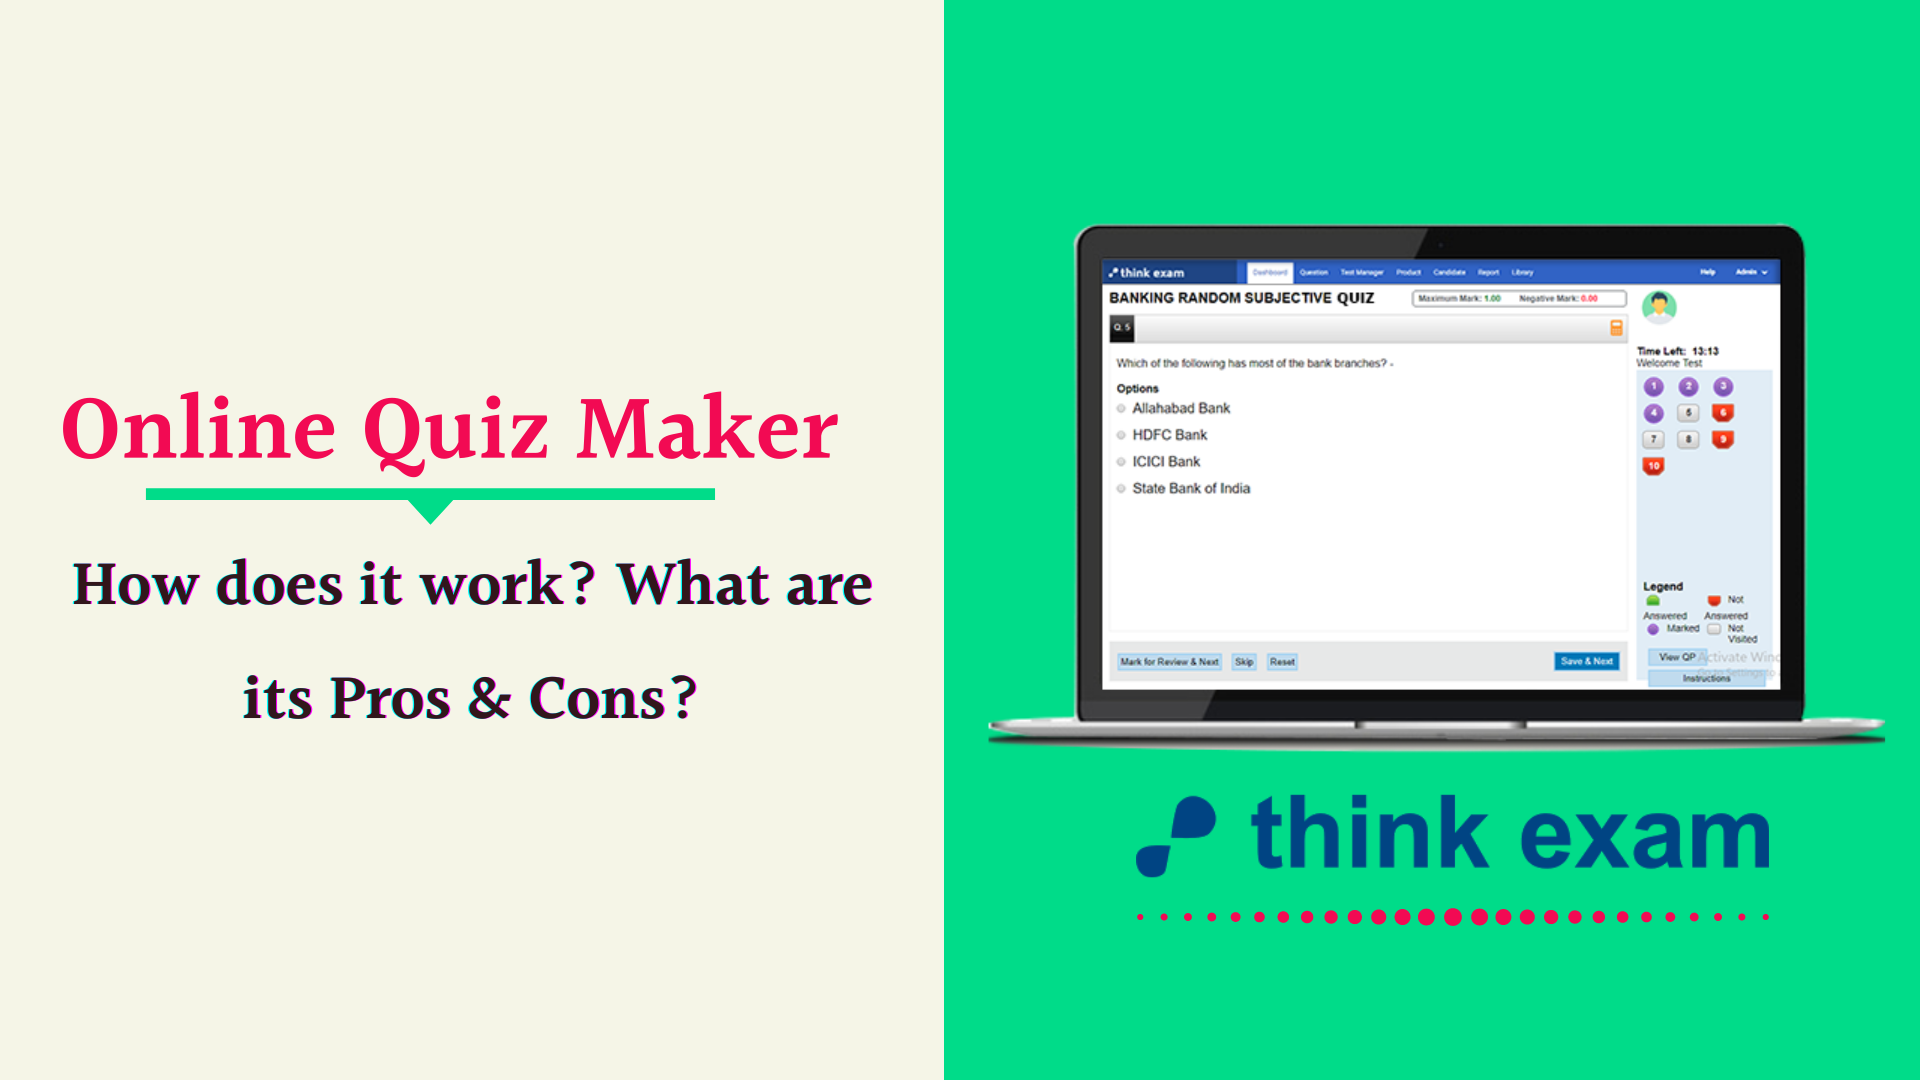 Online Quiz Maker How does it work What are its Pros & Cons